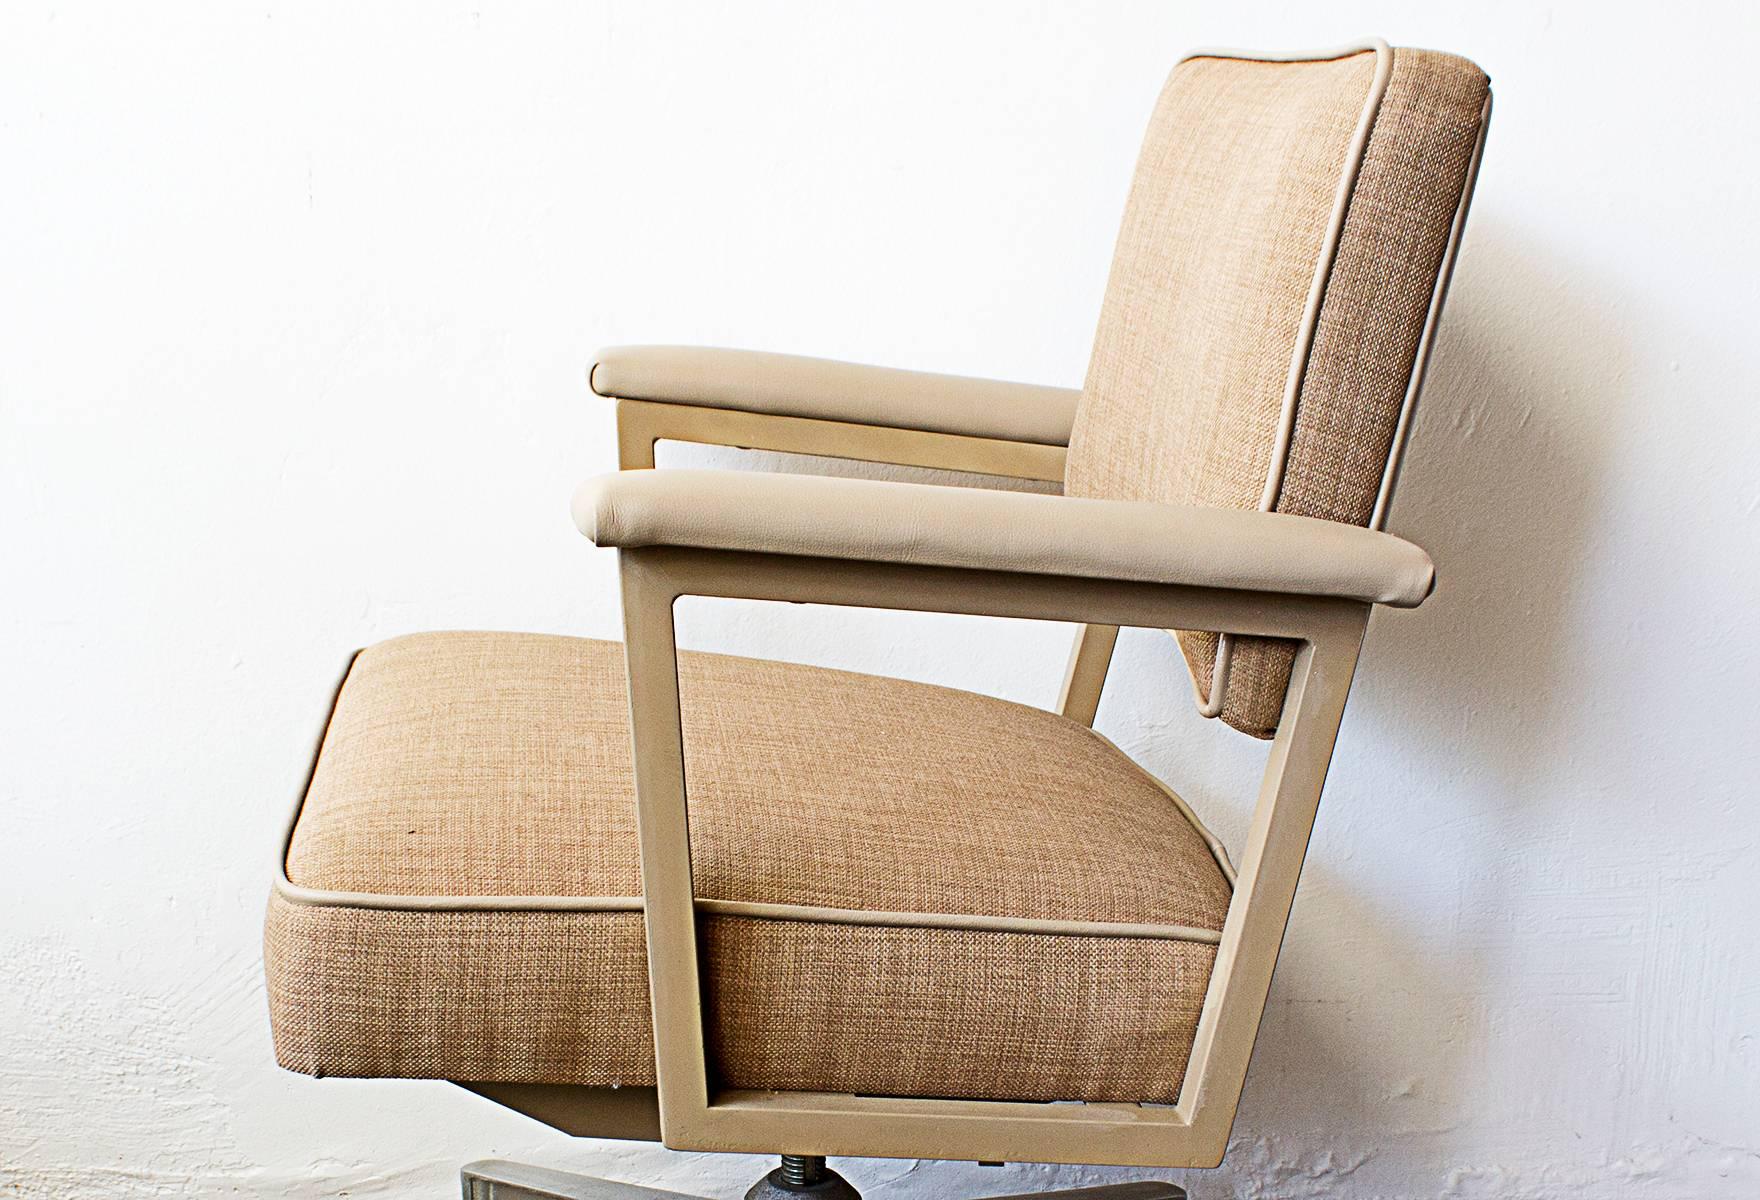 Classic pair of 1970s tanker-style office chairs by Steelcase. Newly reupholstered in cream linen and high-quality vinyl. Swivels, rolls and adjusts. Sold as a pair. 

Dimensions: 19